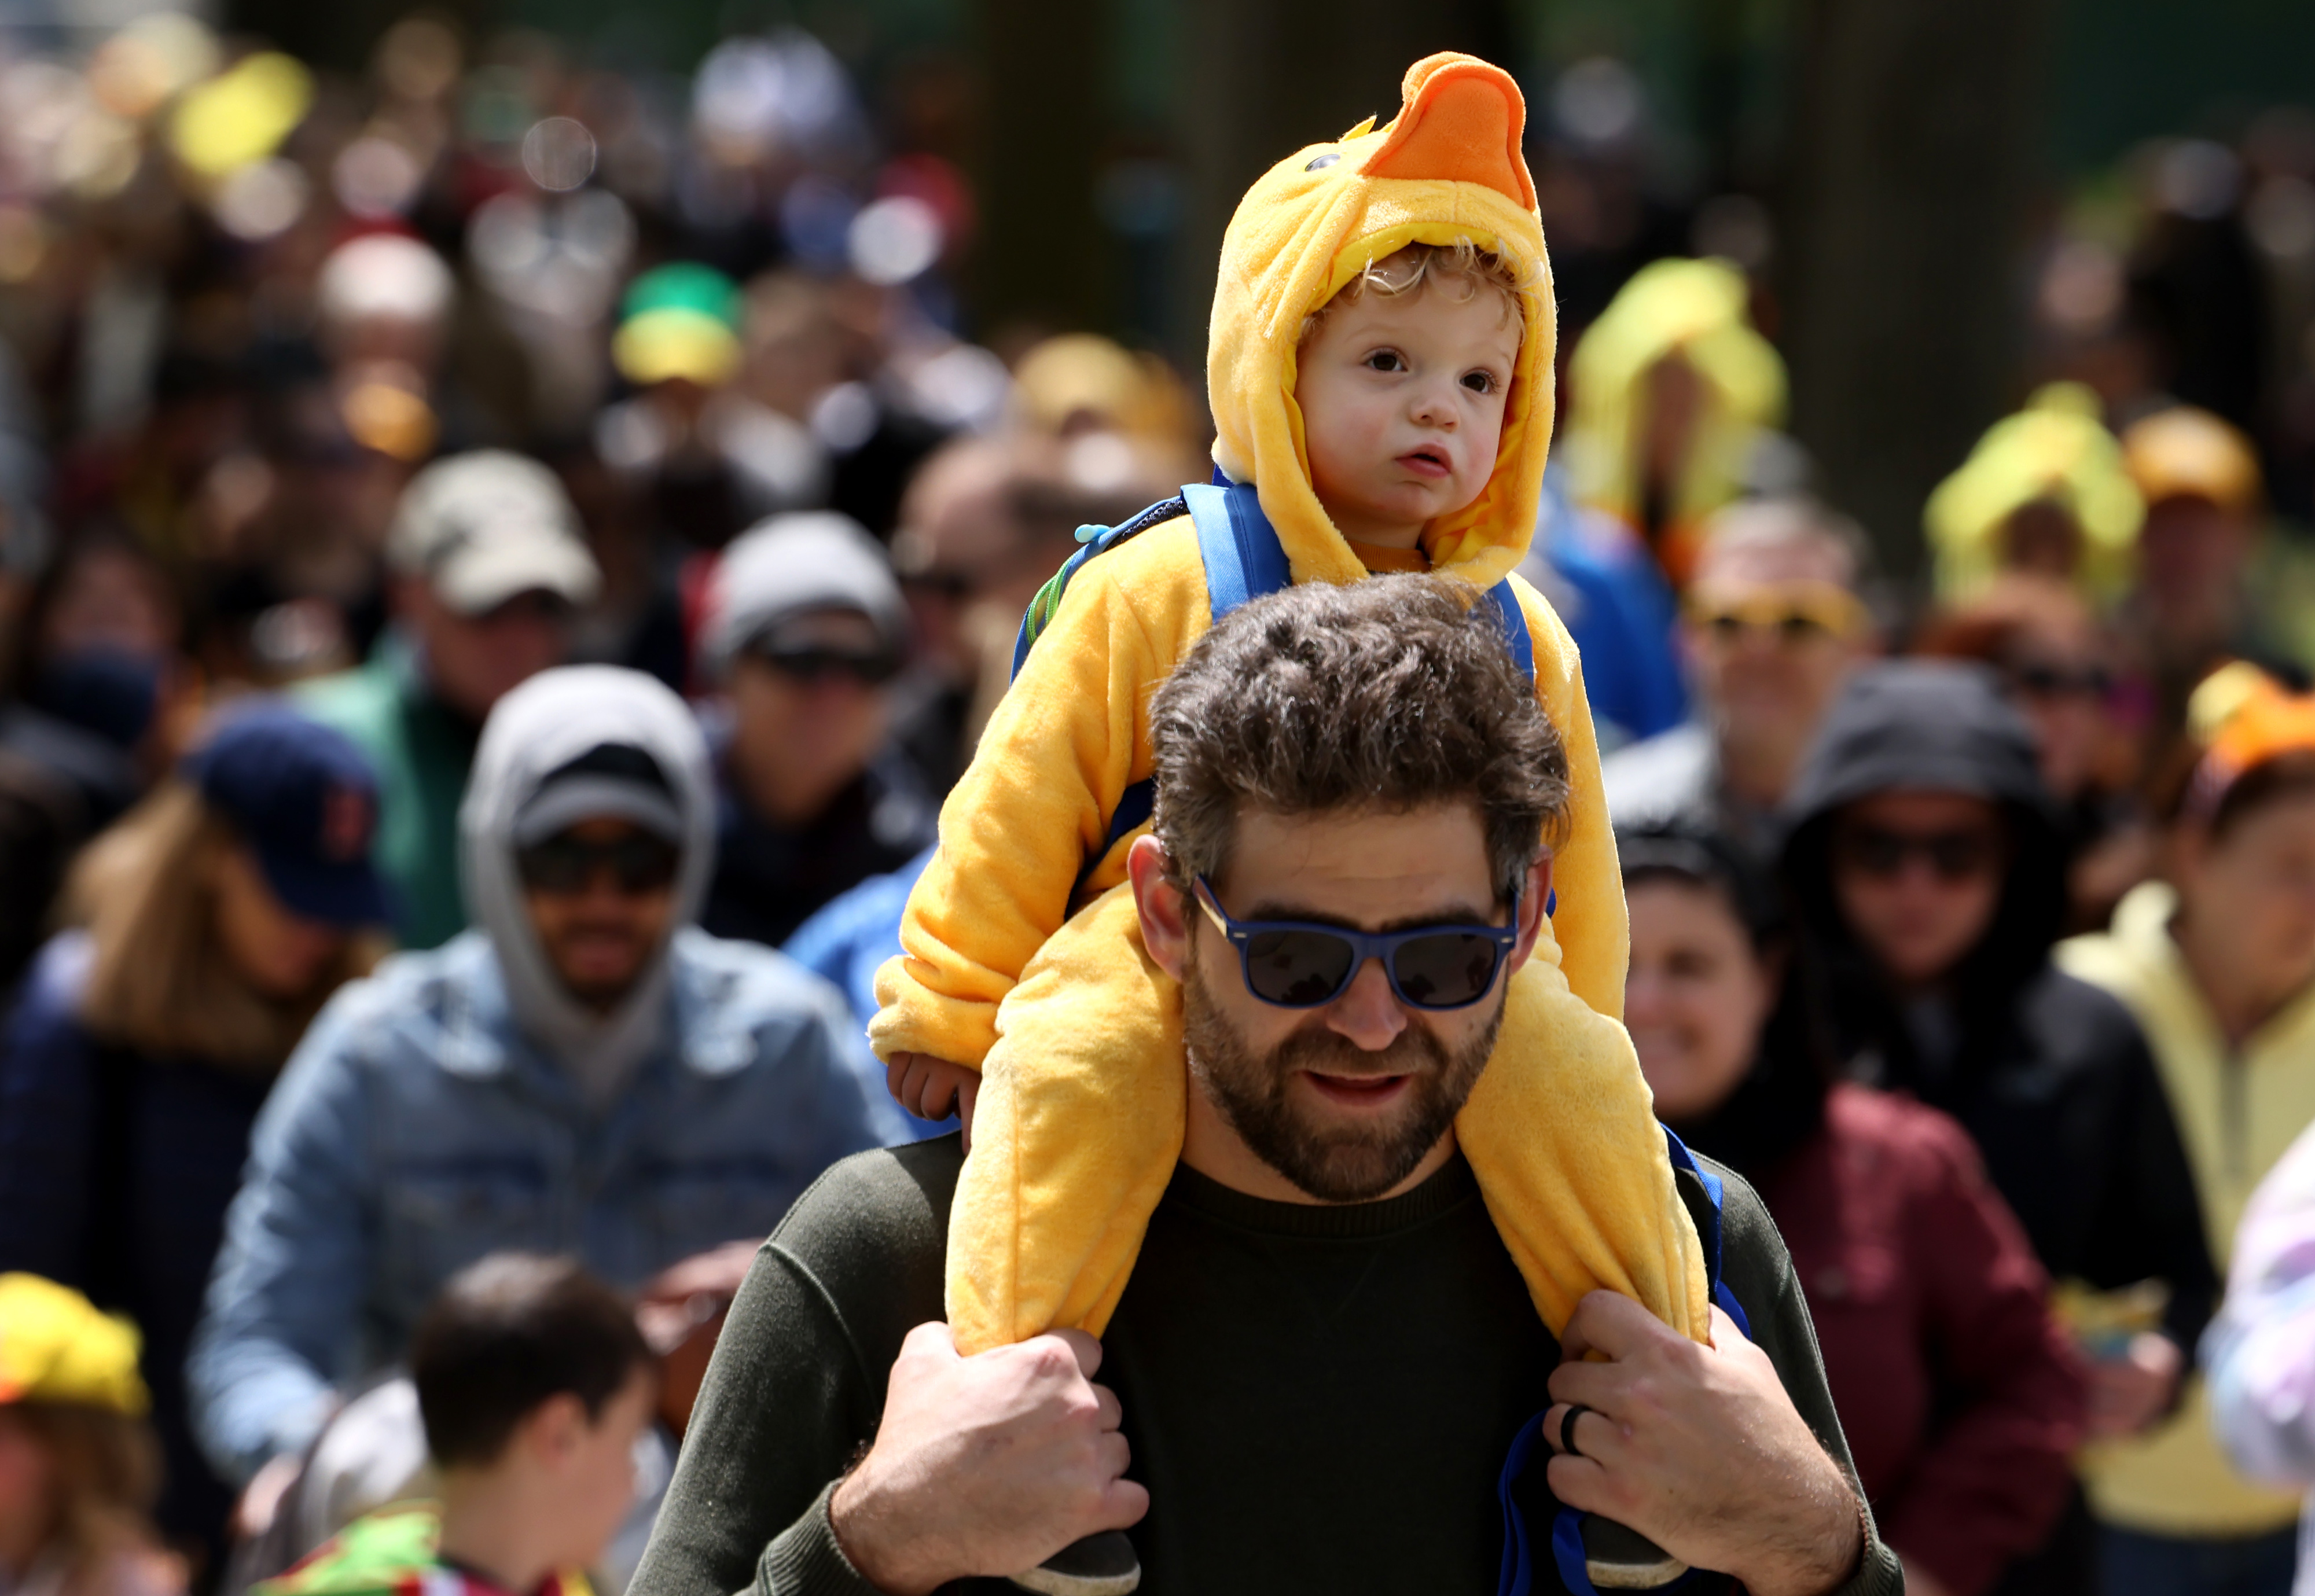 Duckling Day returns, bringing adorably dressed up children to the Common -  The Boston Globe